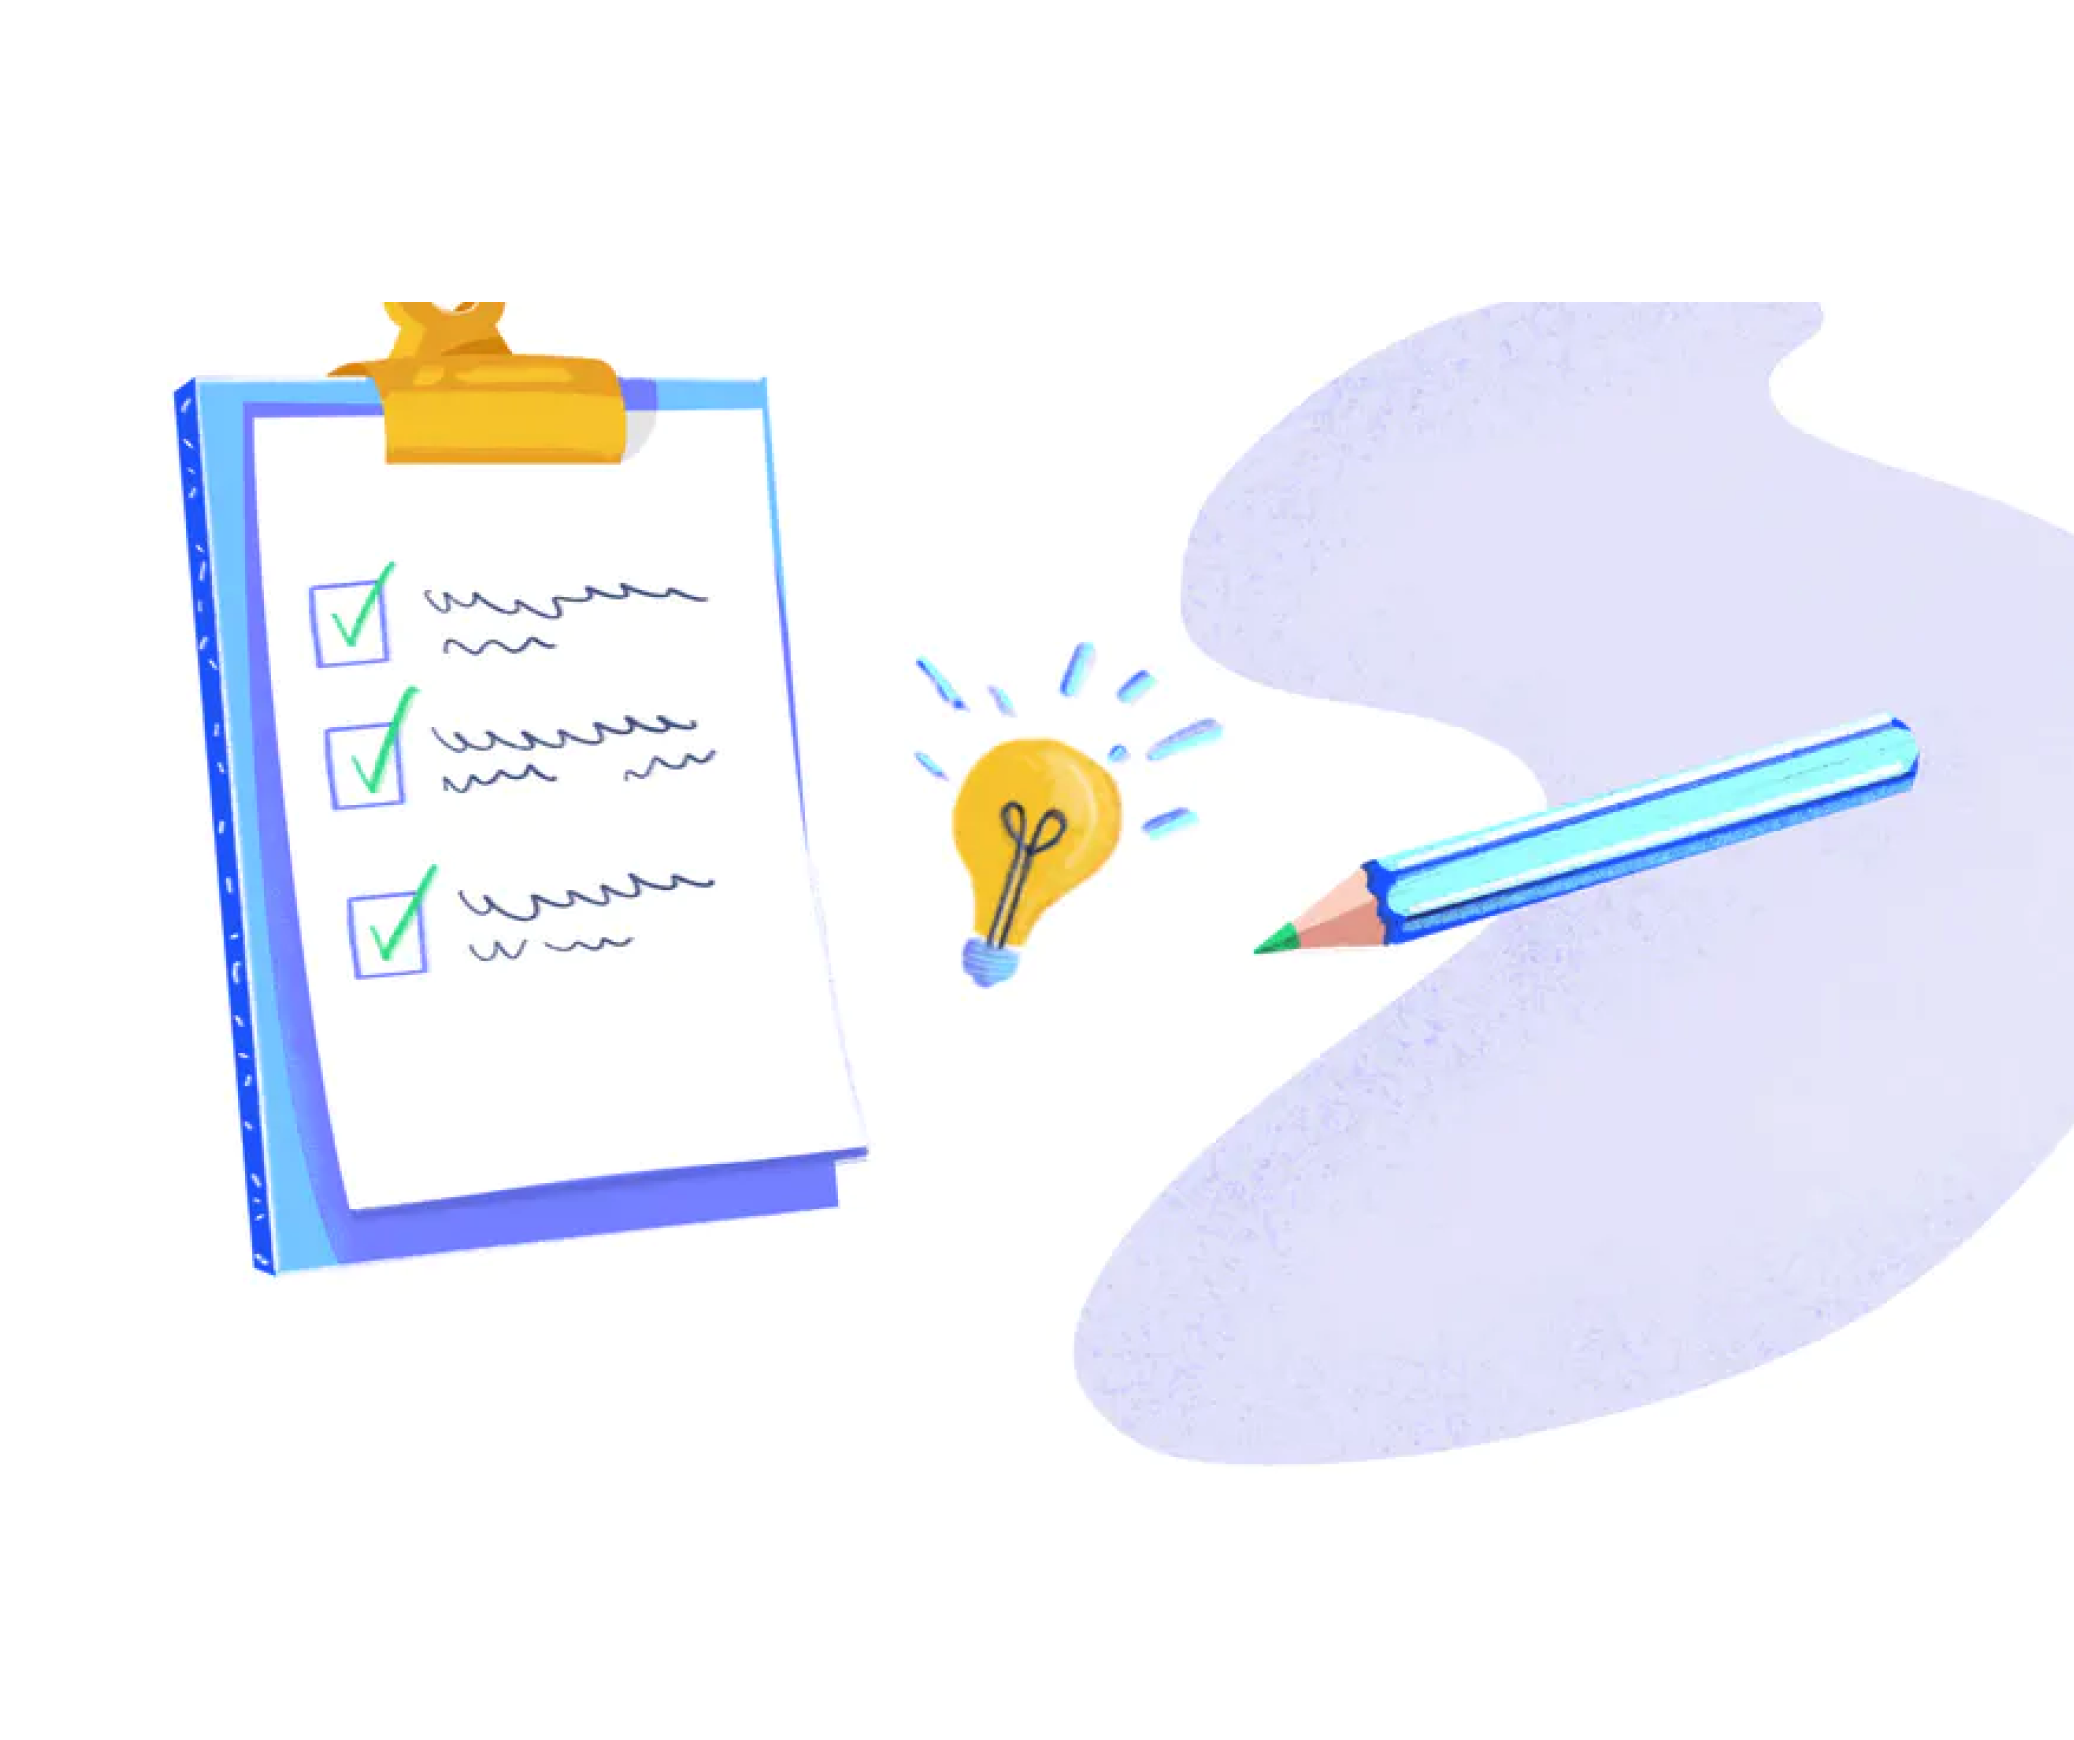 8 tips for writing great usability tasks